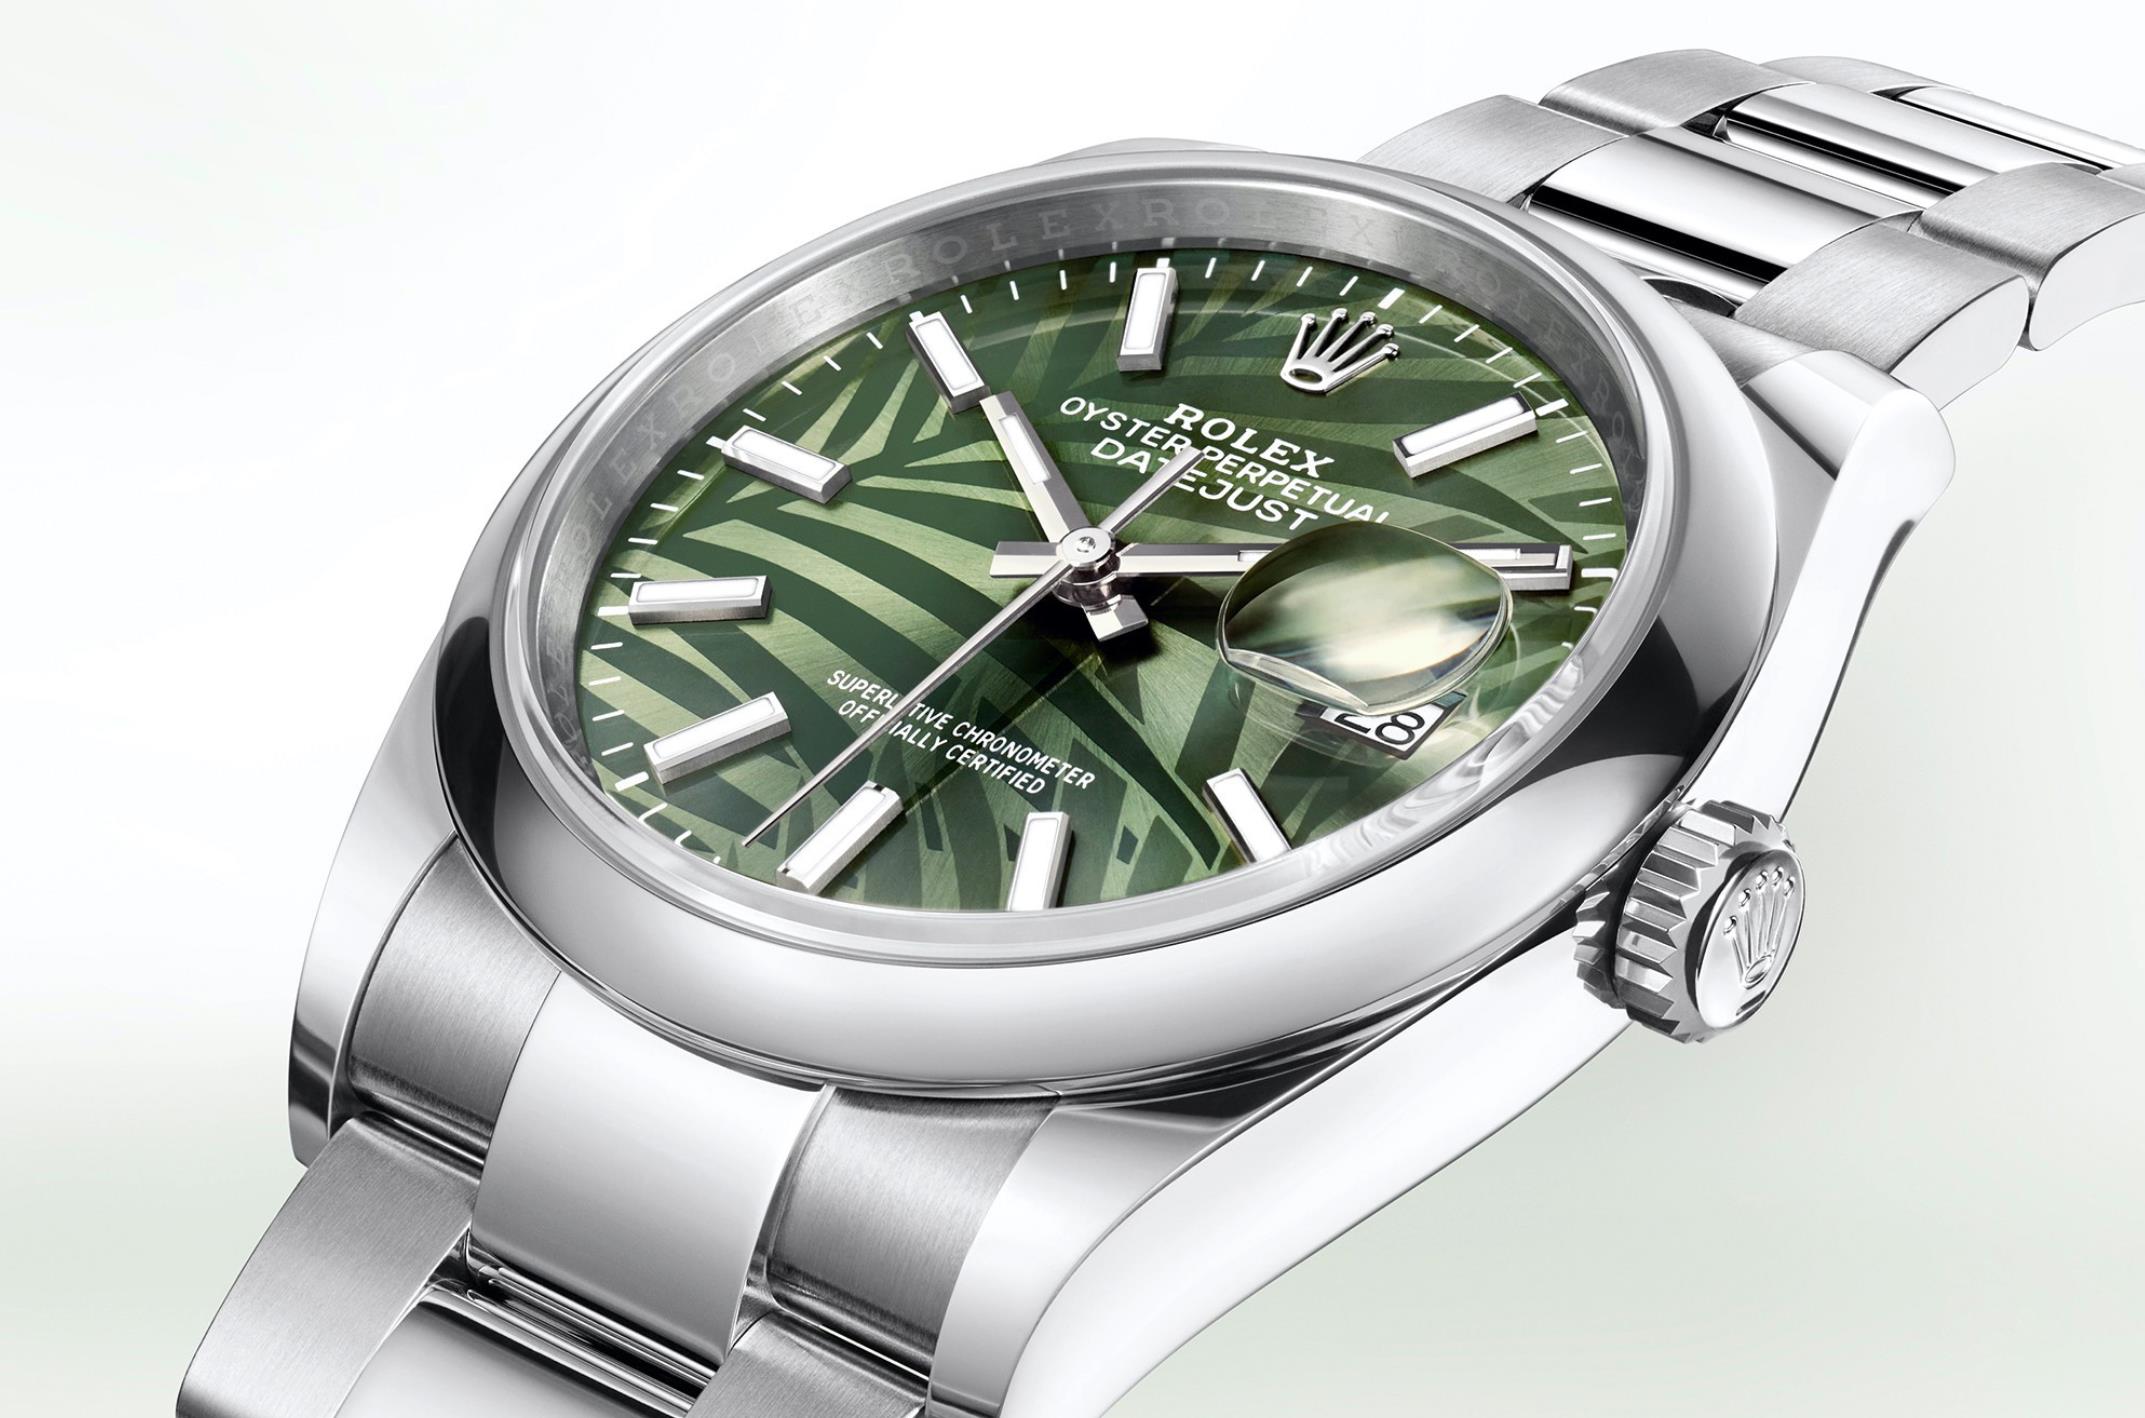 The green dial fake watch has a date window.